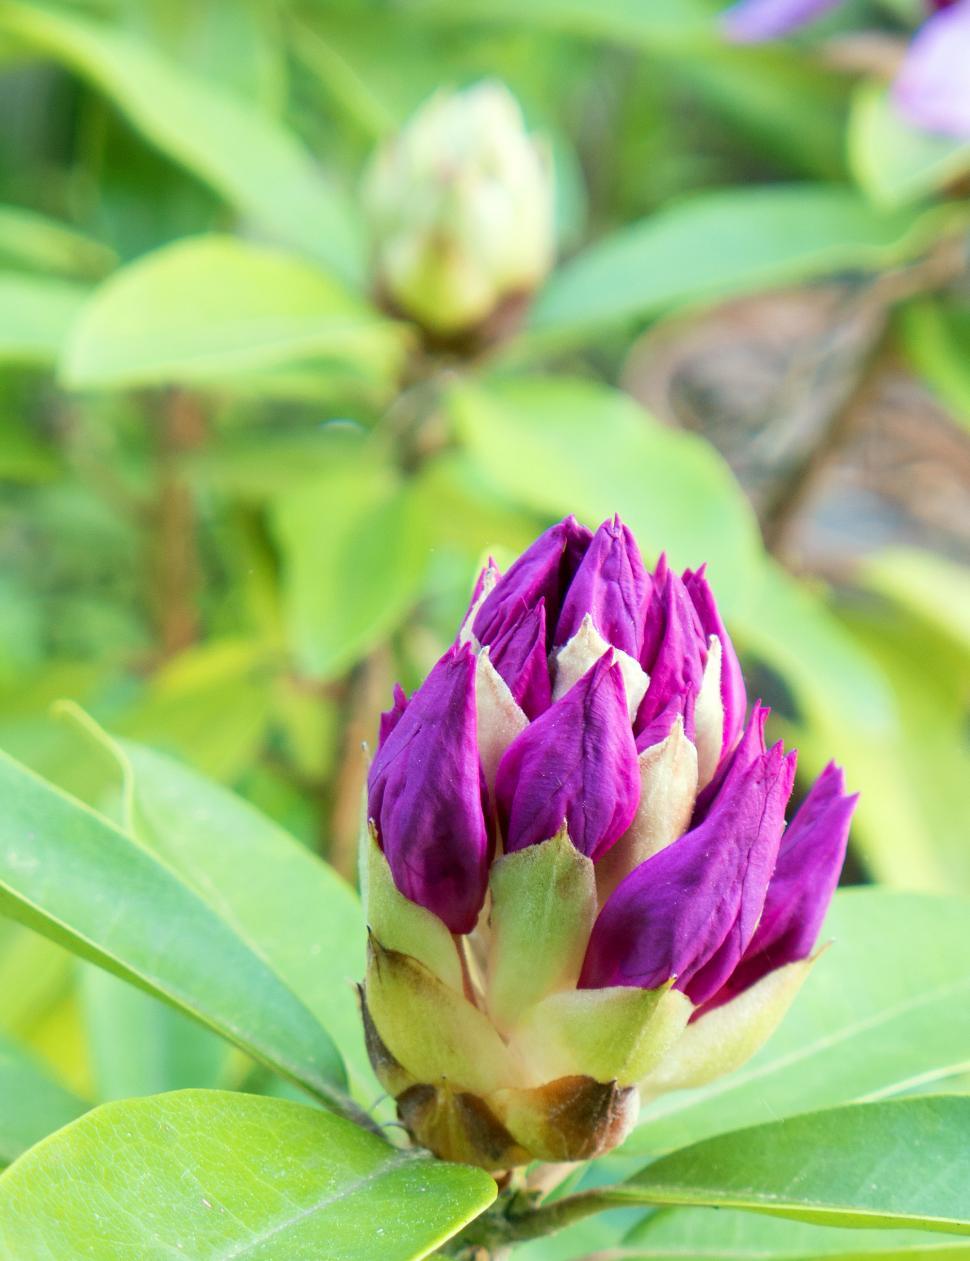 Free Image of Backyard Rhododendron Flower Buds 